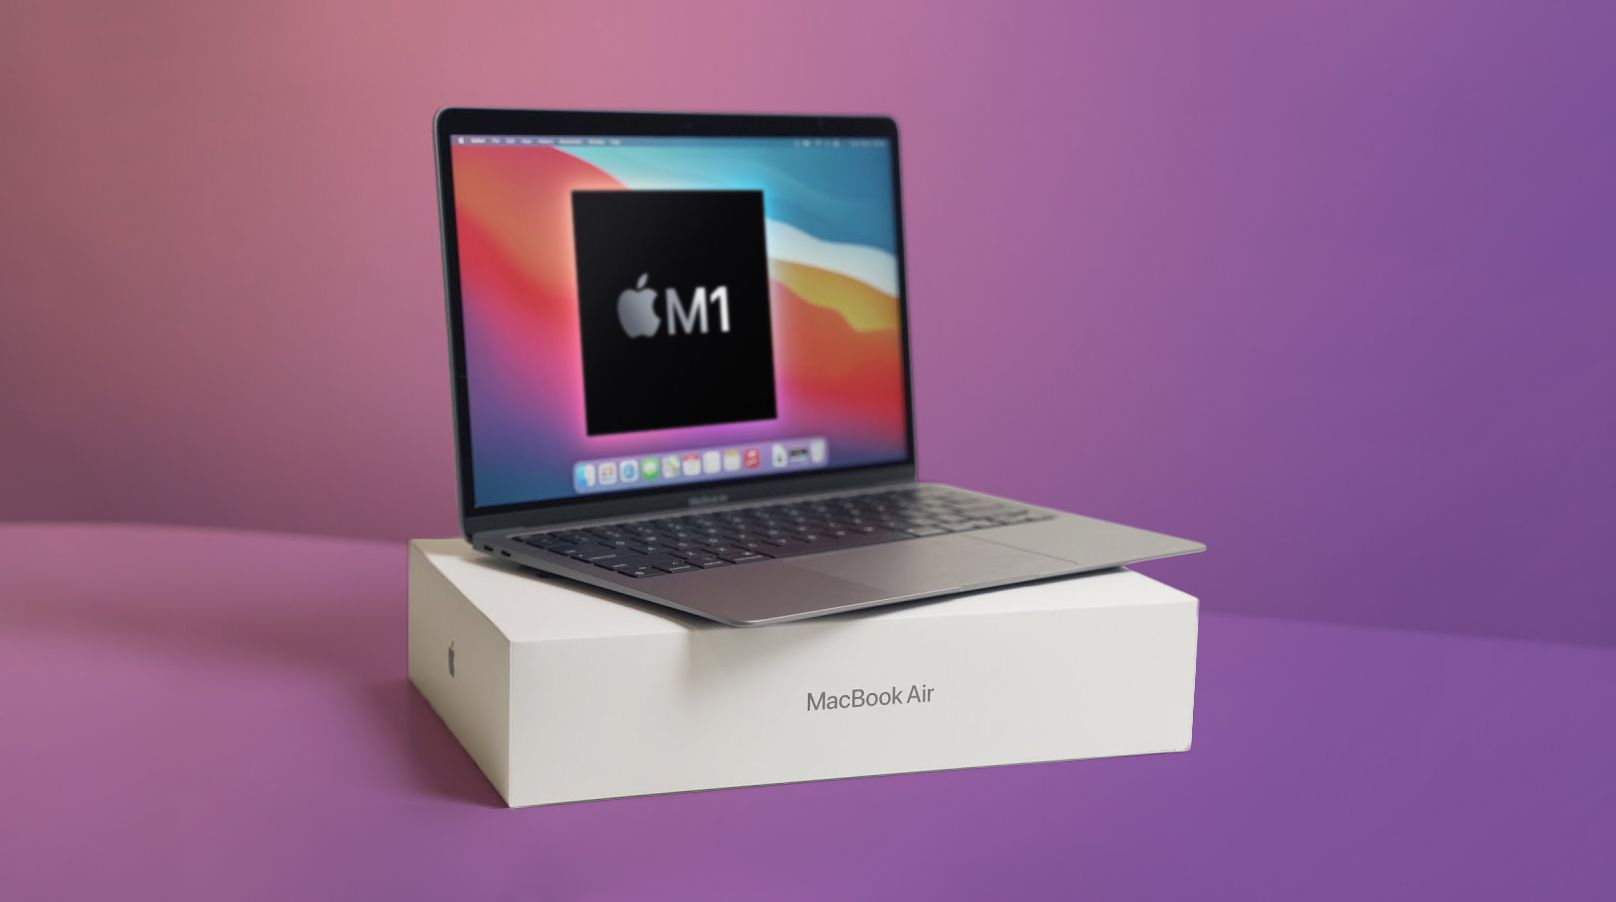 Deals: Get Apple's 512GB M1 MacBook Air for New Low Price of $1,049.99 ($199 Off)